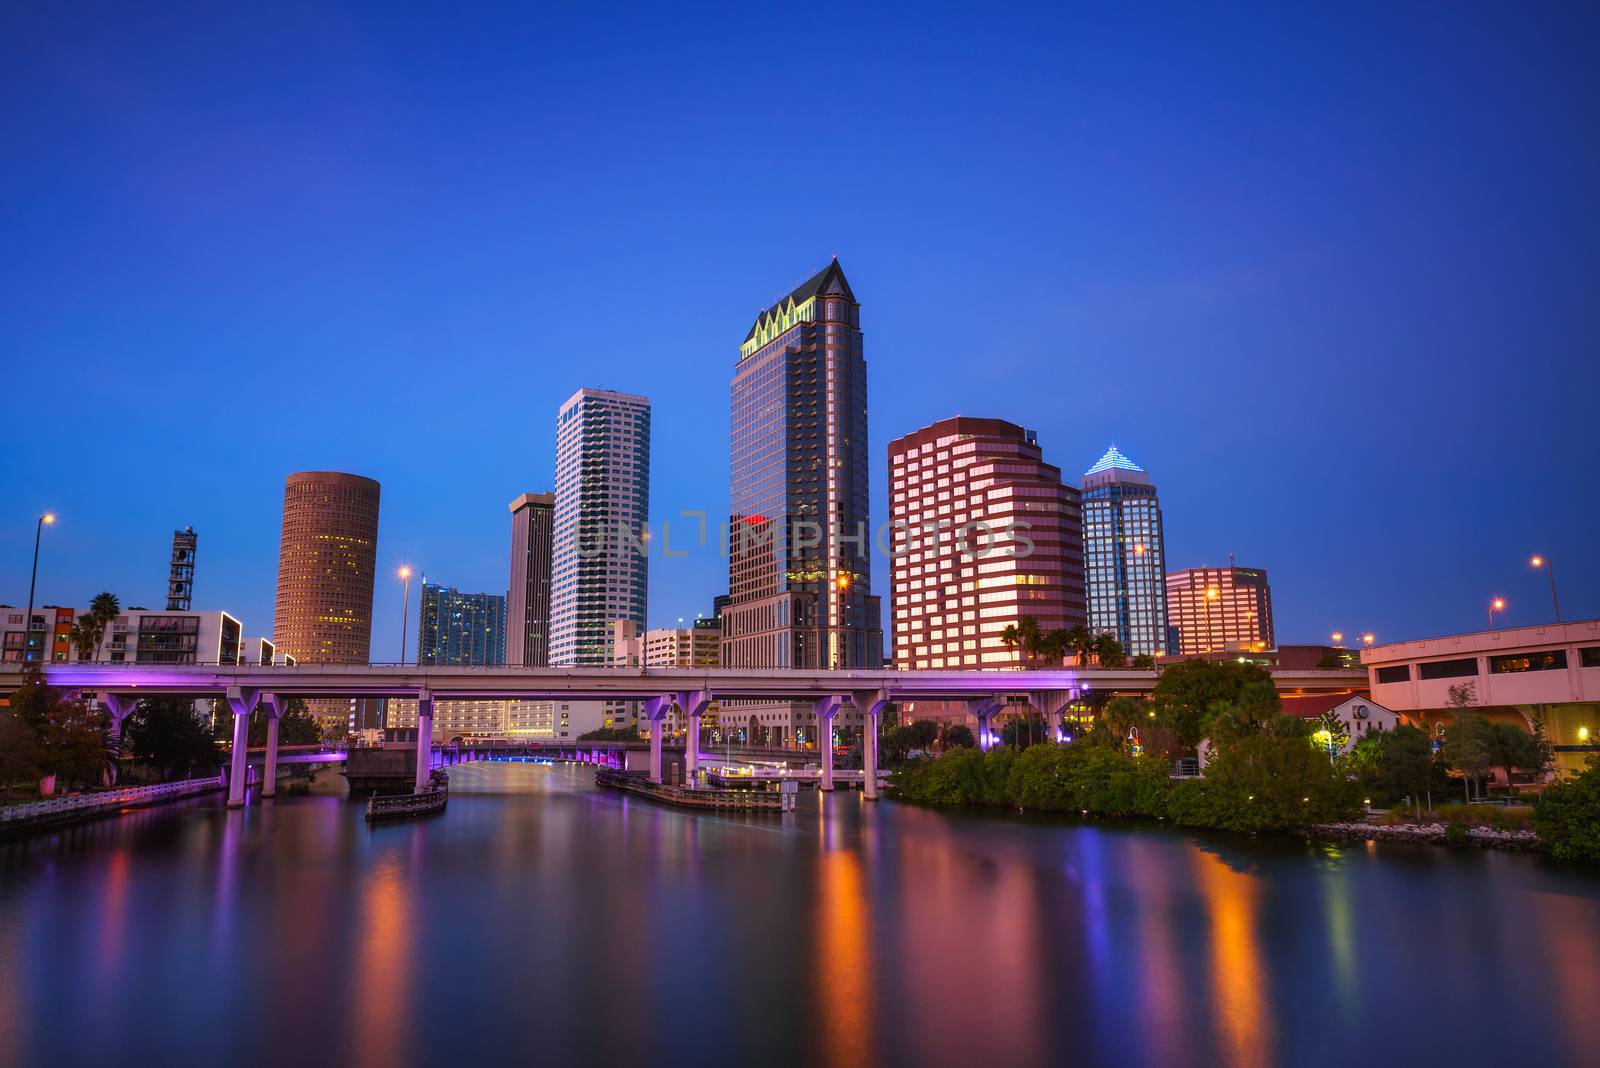 Tampa skyline after sunset with Hillsborough river in the foreground by nickfox